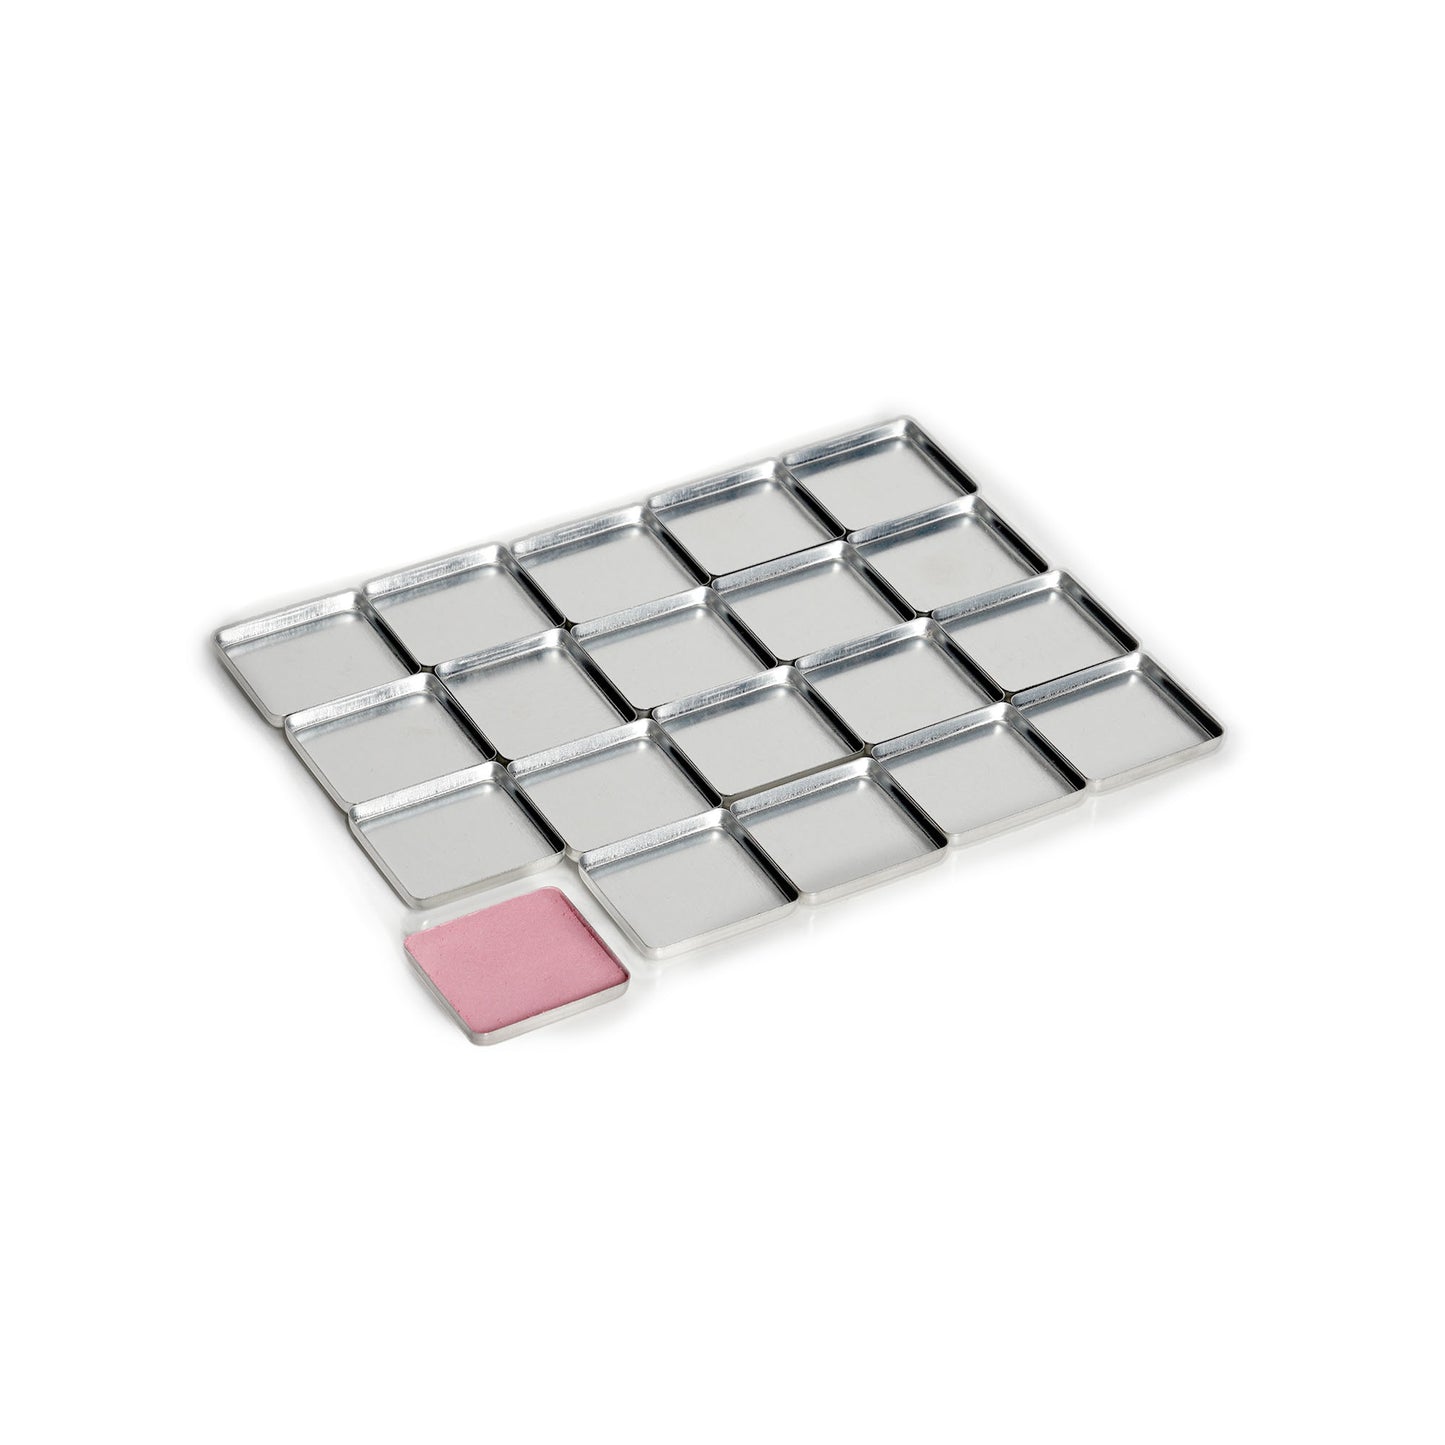 FIXY Square Magnetic Makeup Pans